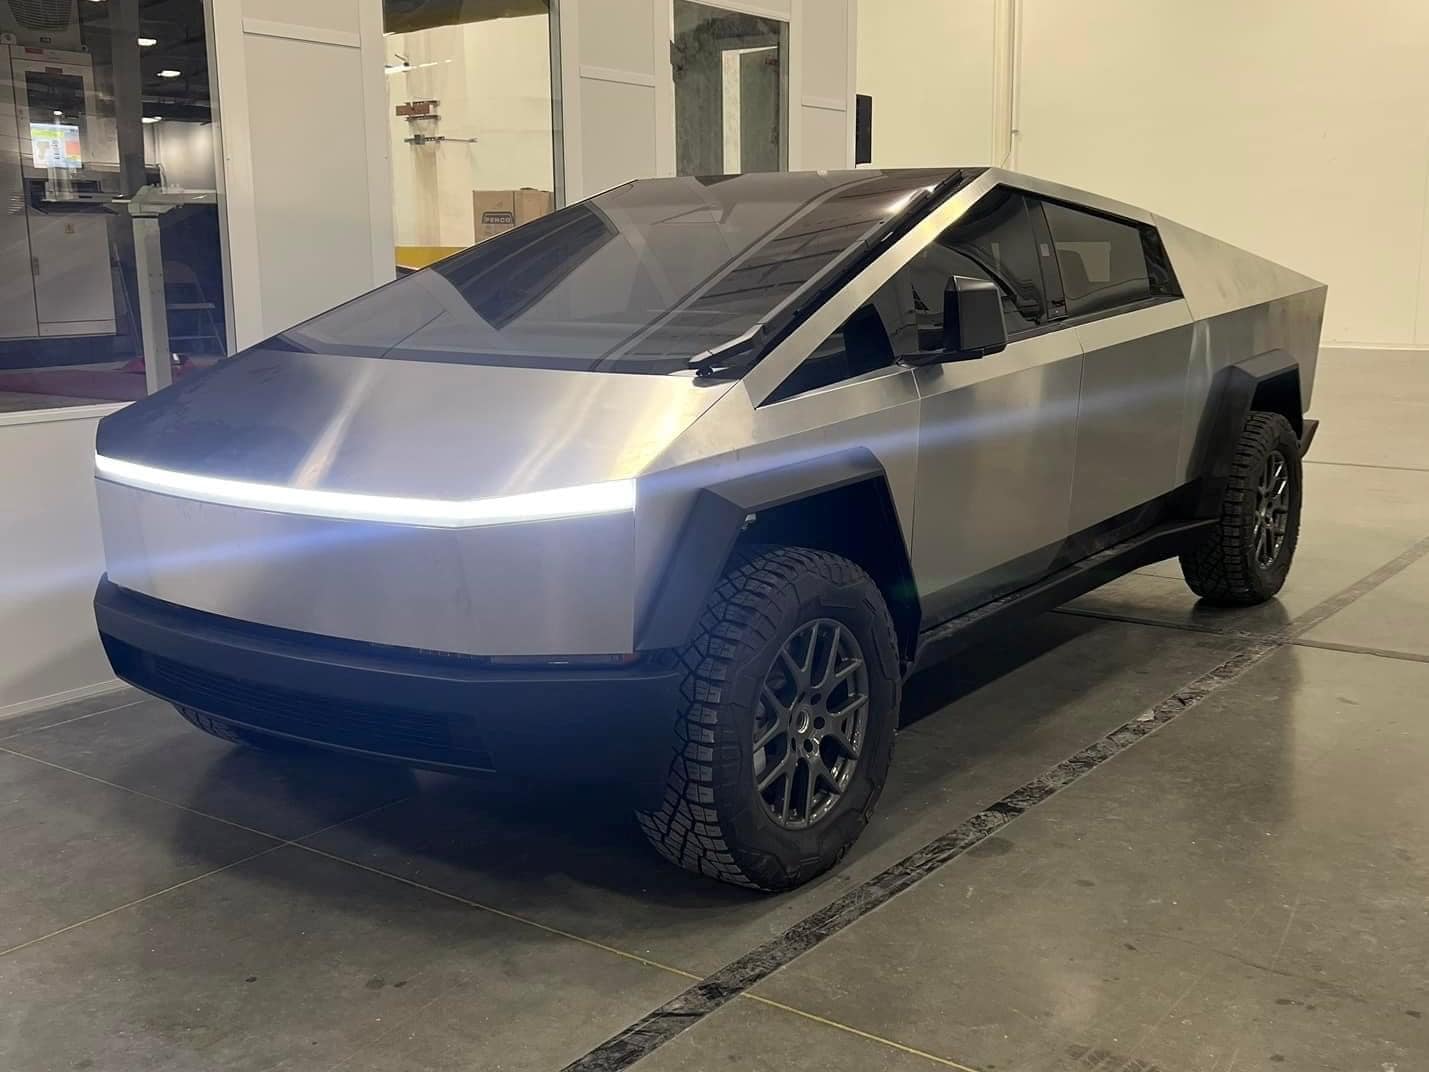 Tesla Cybertruck leaked images show clear look at updated alpha prototype